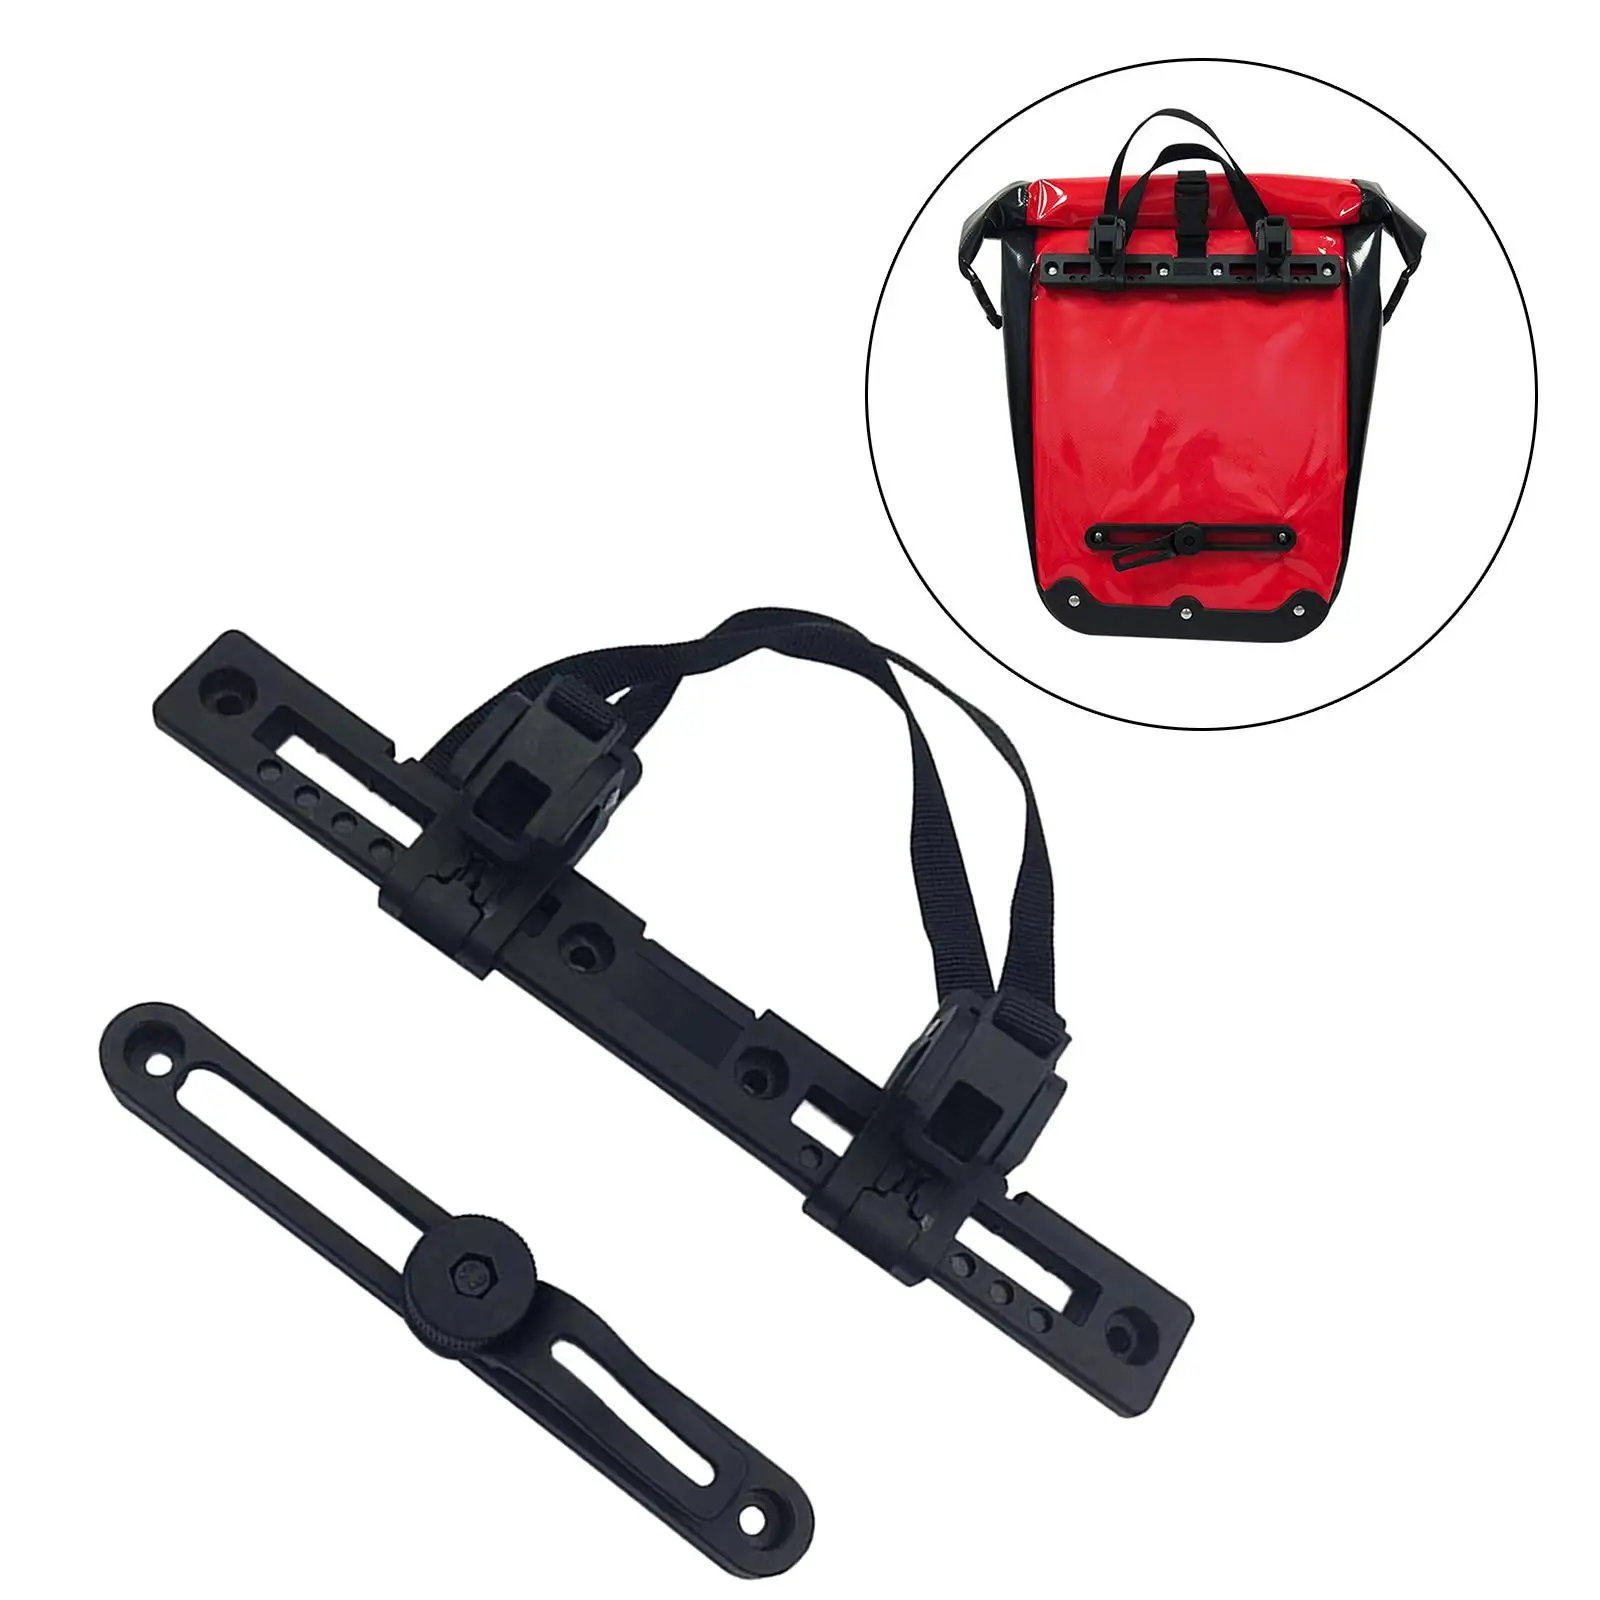 Adjustable Bicycle side bags Buckle Riding Equipment Bike Accessory